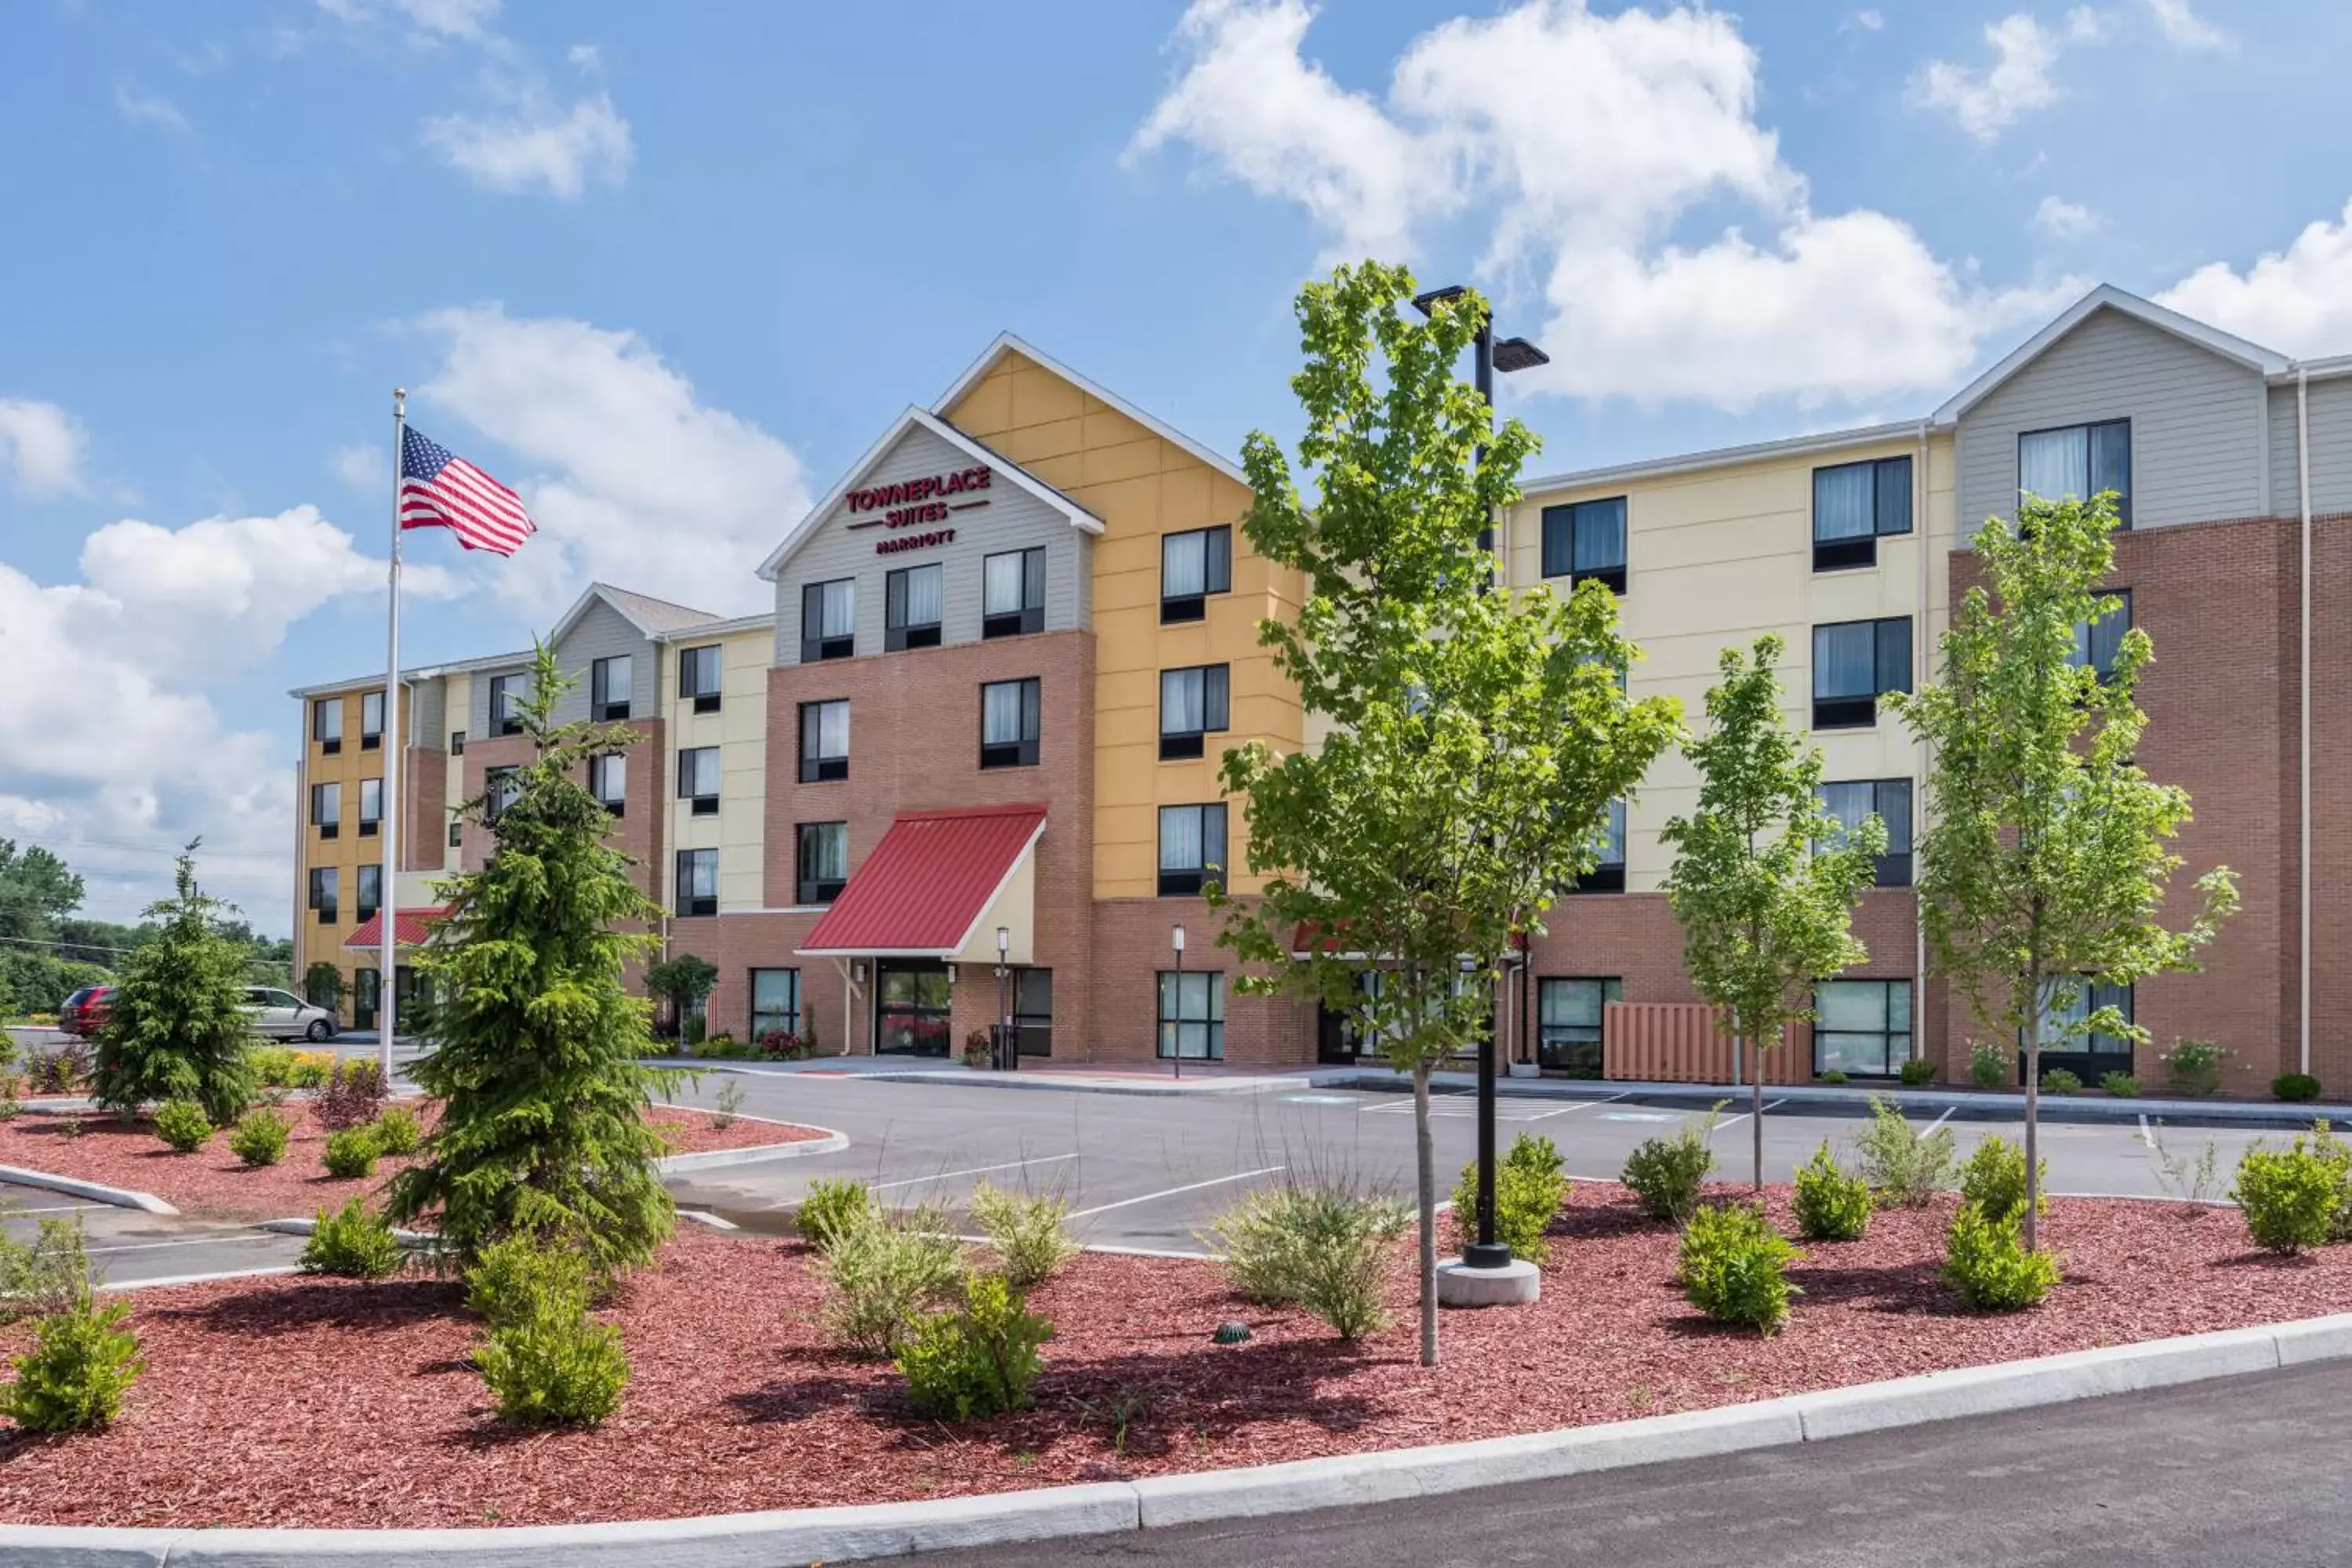 Property Building in TownePlace Suites by Marriott New Hartford